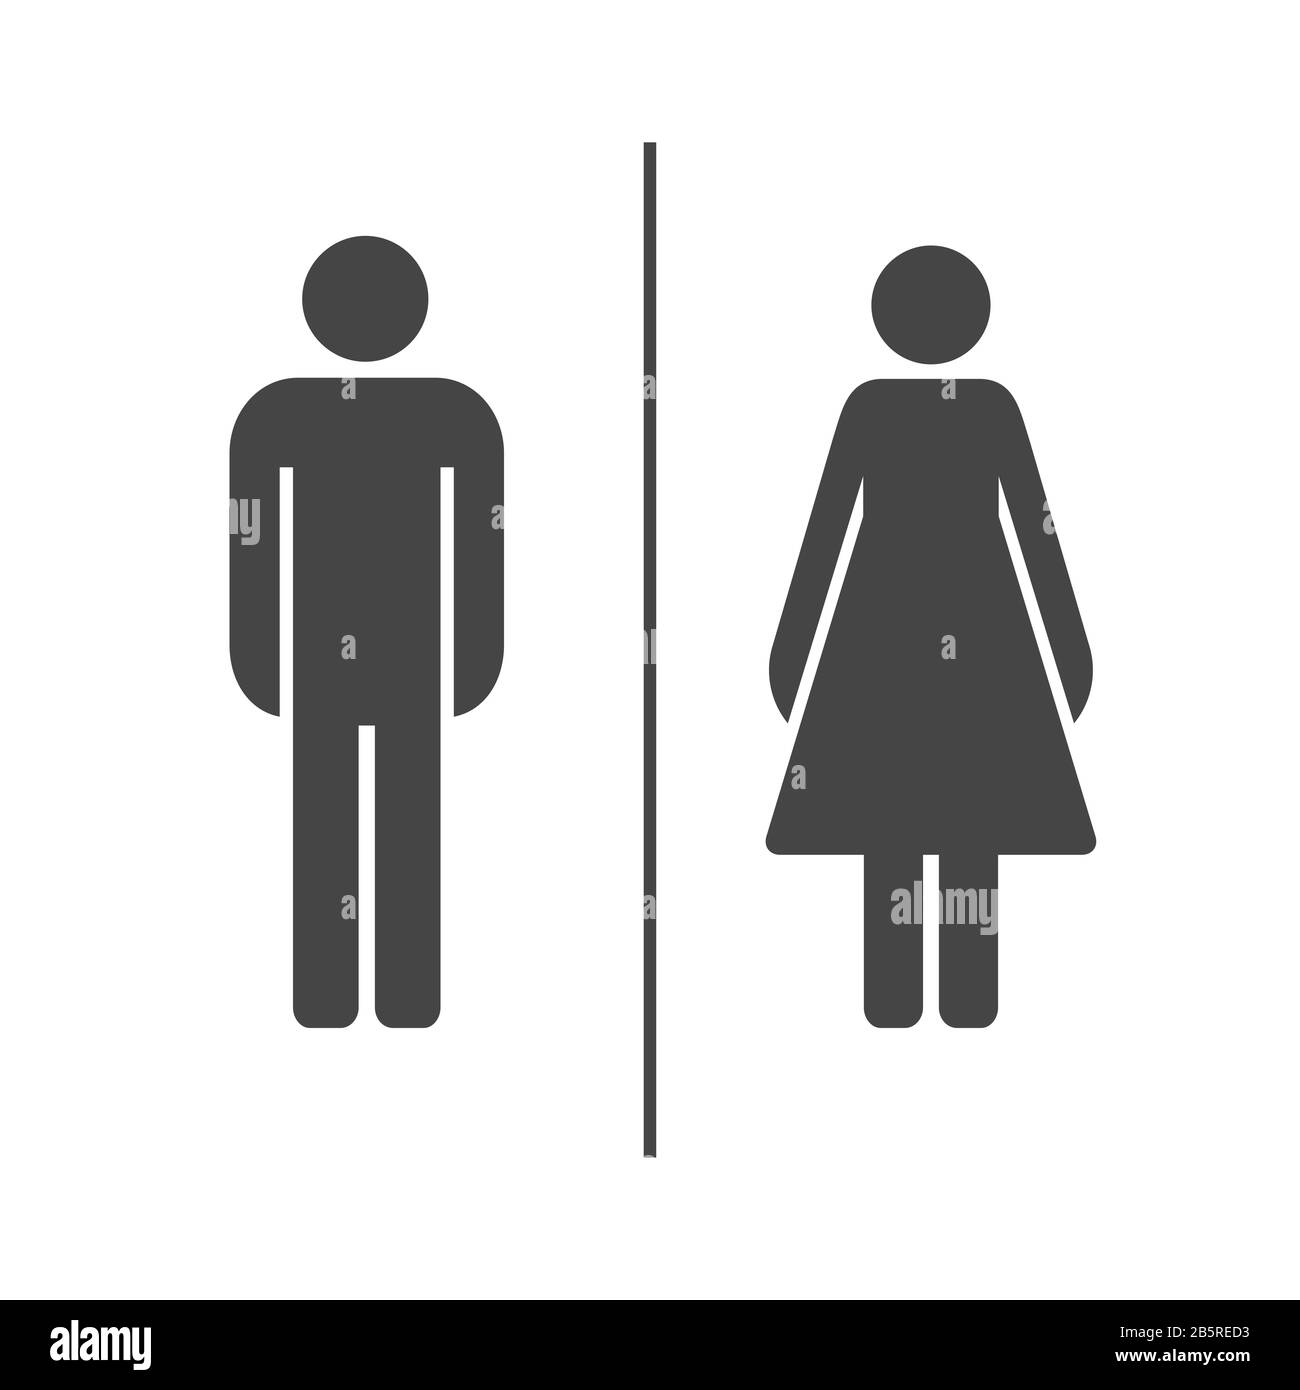 Silhouette toilet sign illustration. Man and woman sign Stock Photo - Alamy